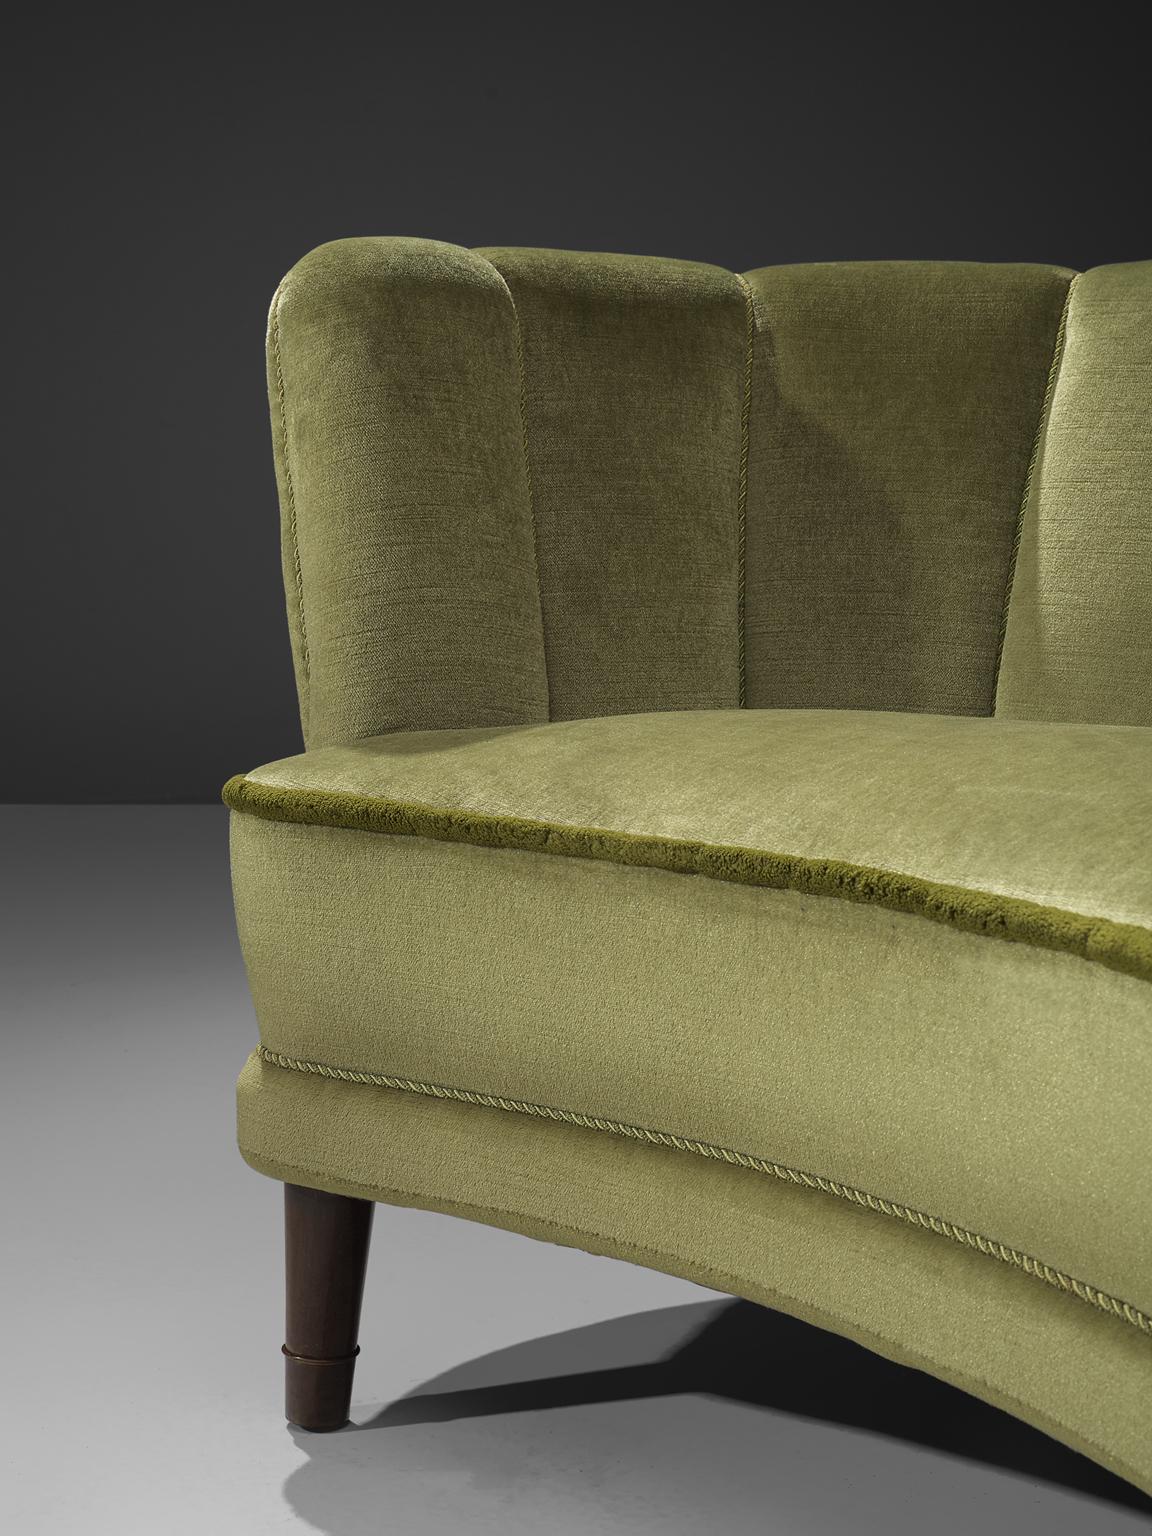 French Classic Sofa with Green Velvet Upholstery 1